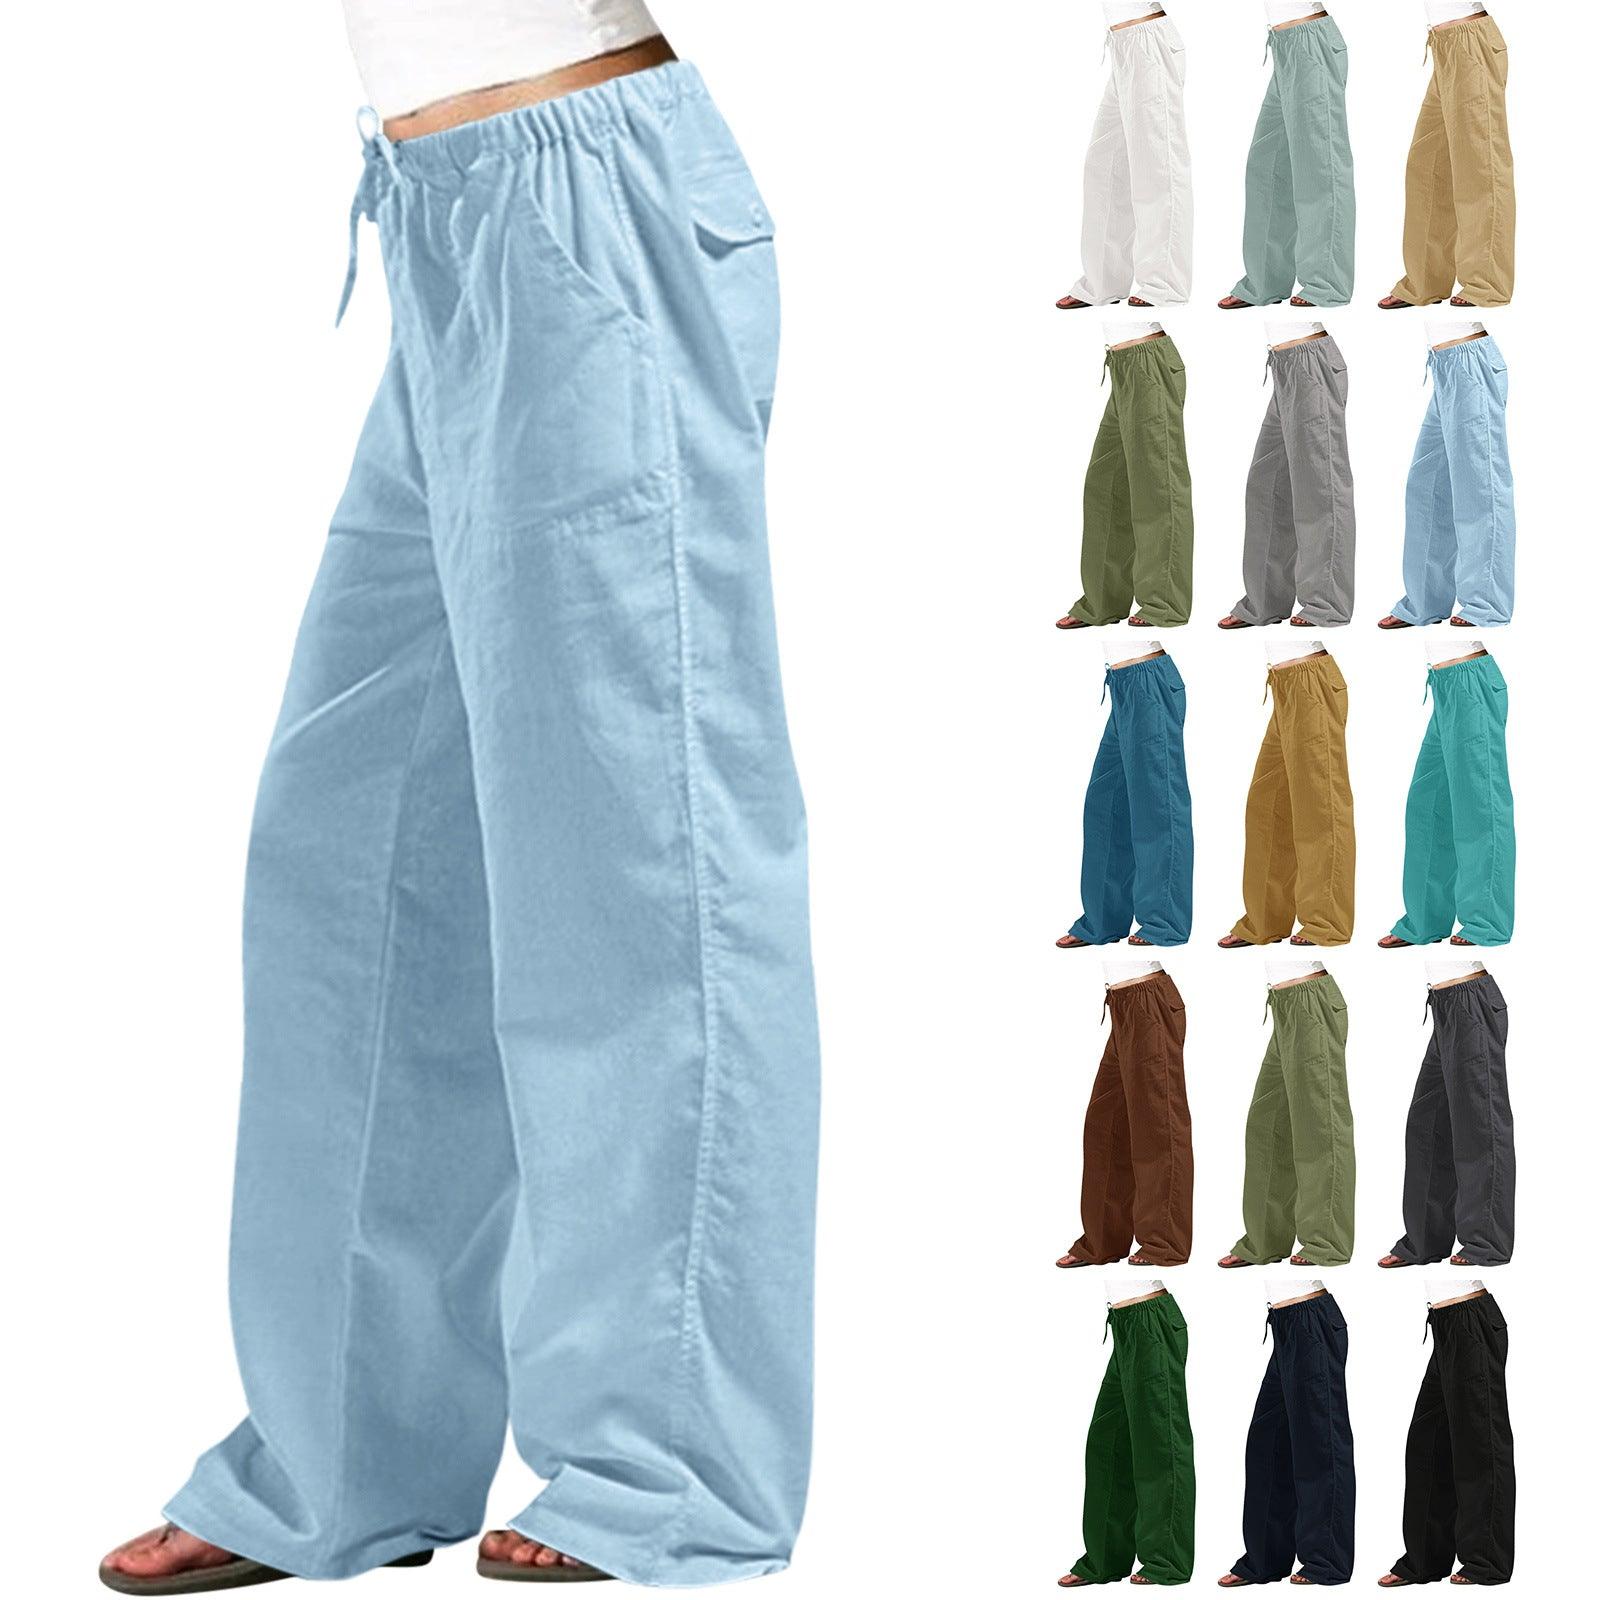 Comfortable and Stylish Elastic Waist Linen Trousers for Women: Effortless Chic with Added Convenience - Your-Look